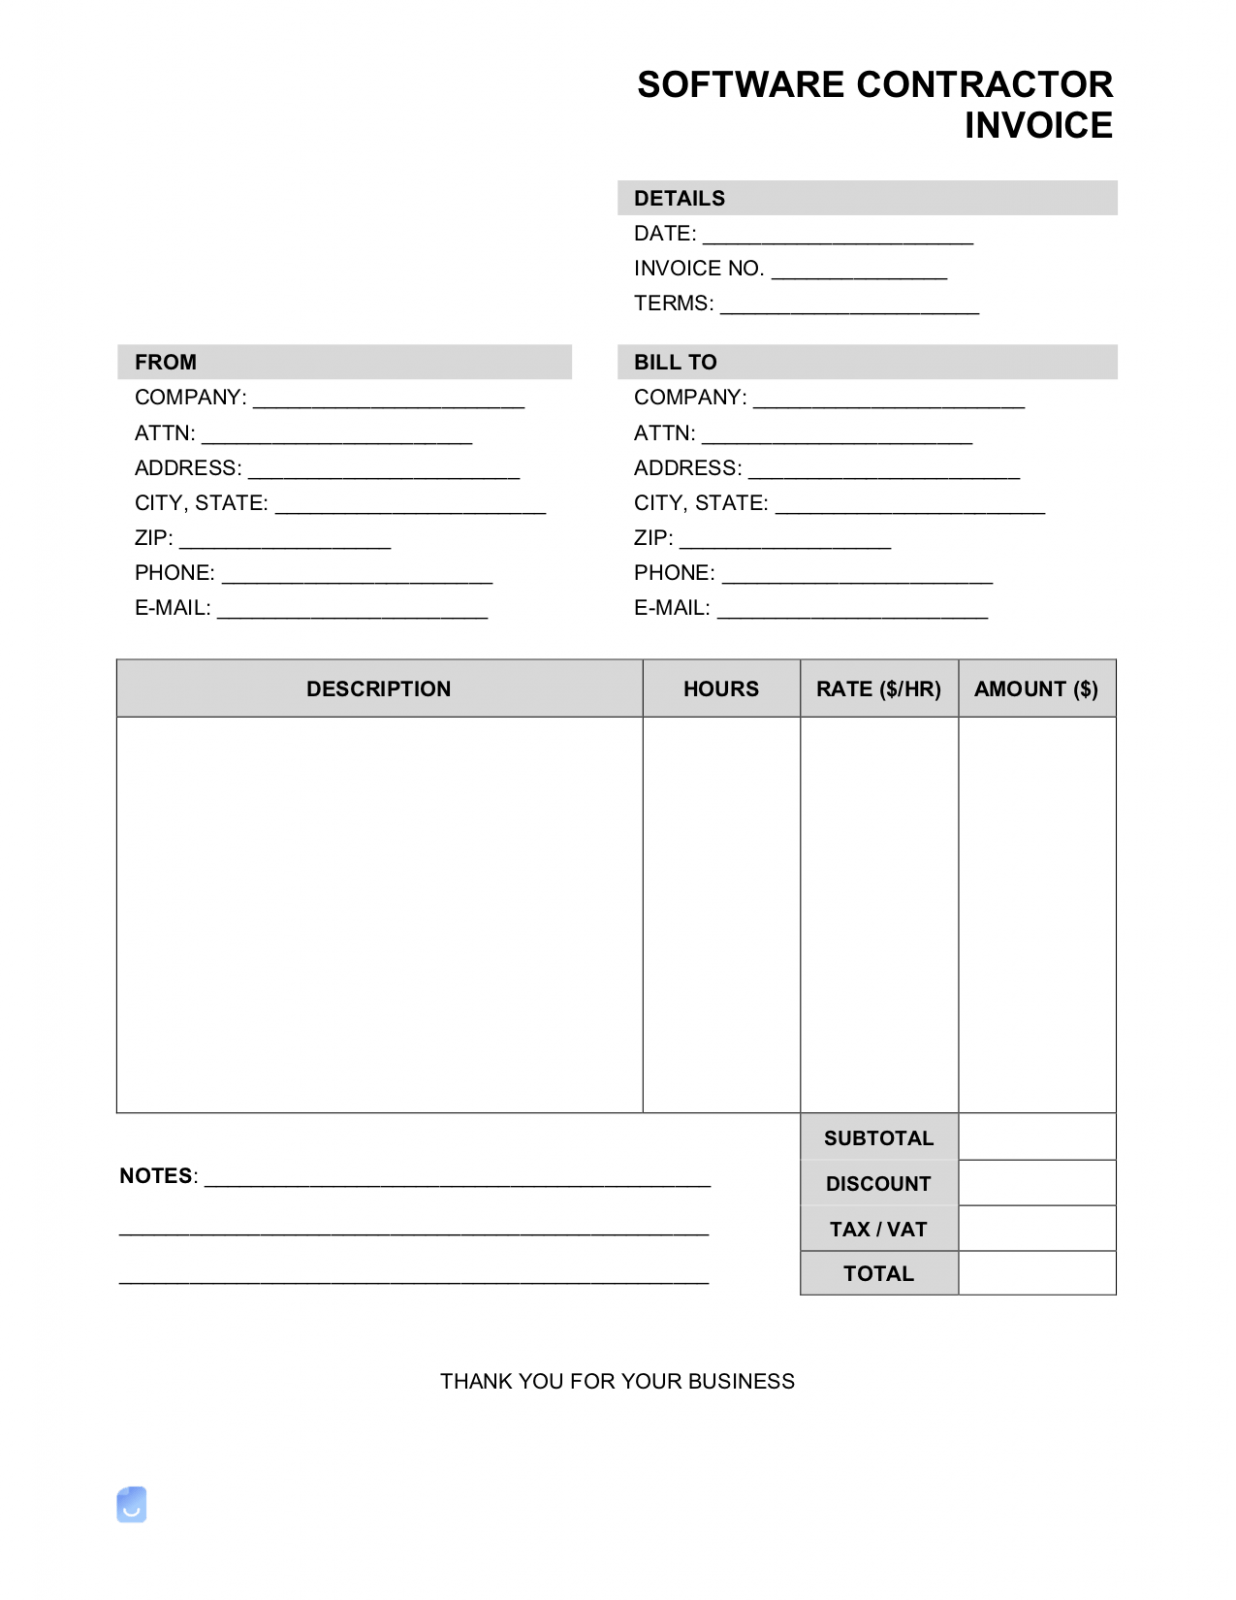 Editable Software Contractor Invoice Template Docs